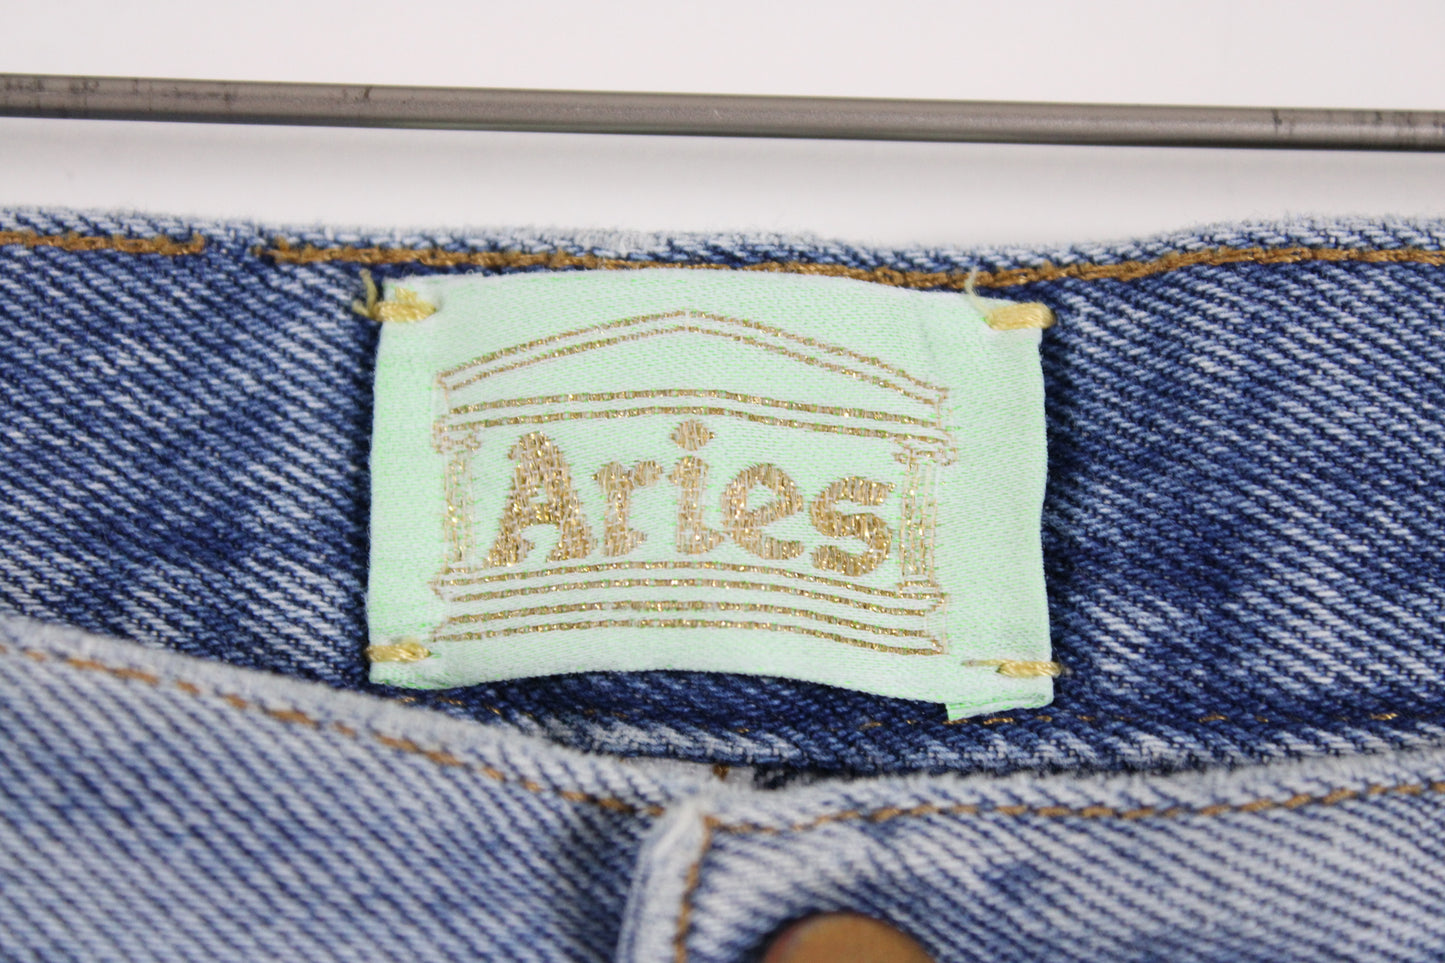 Aries Blue and White Pascal Lilly Denim Pants